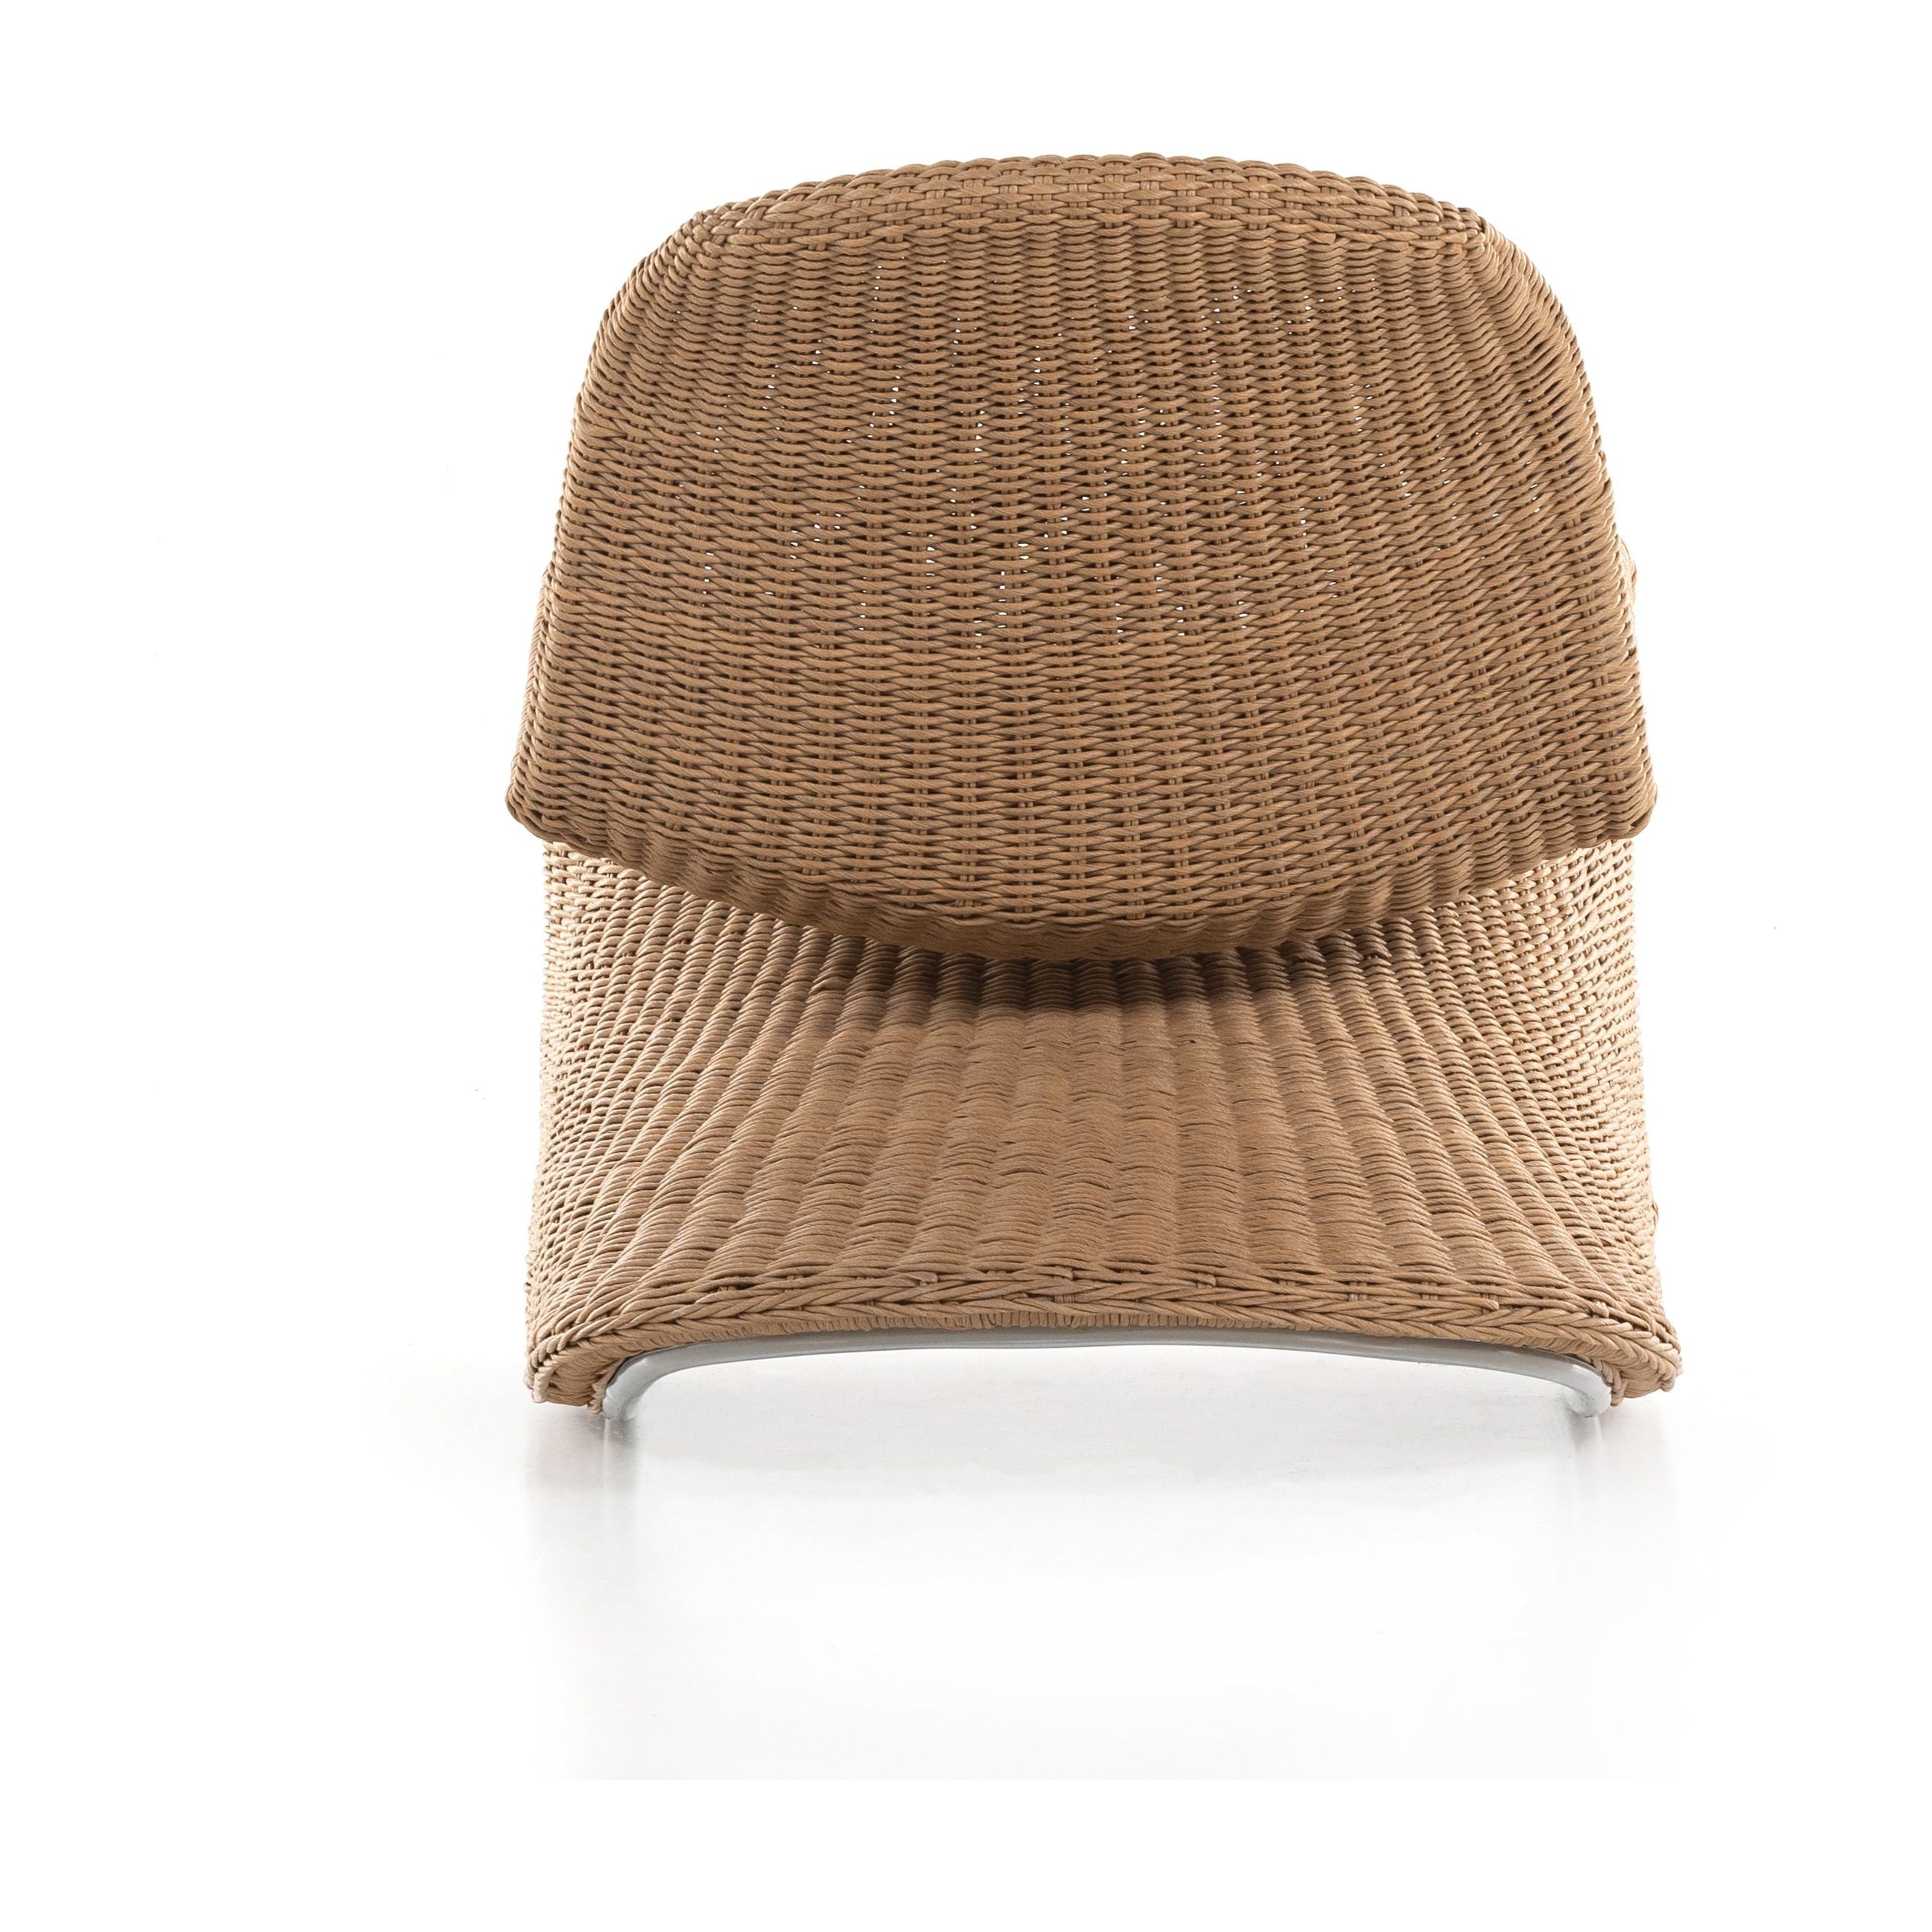 Based off a vintage shape, all-weather wicker seating brings dramatic curves to this statement-making rocking chair. Cover or store indoors during inclement weather and when not in use. Amethyst Home provides interior design, new construction, custom furniture, and area rugs in the Monterey metro area.